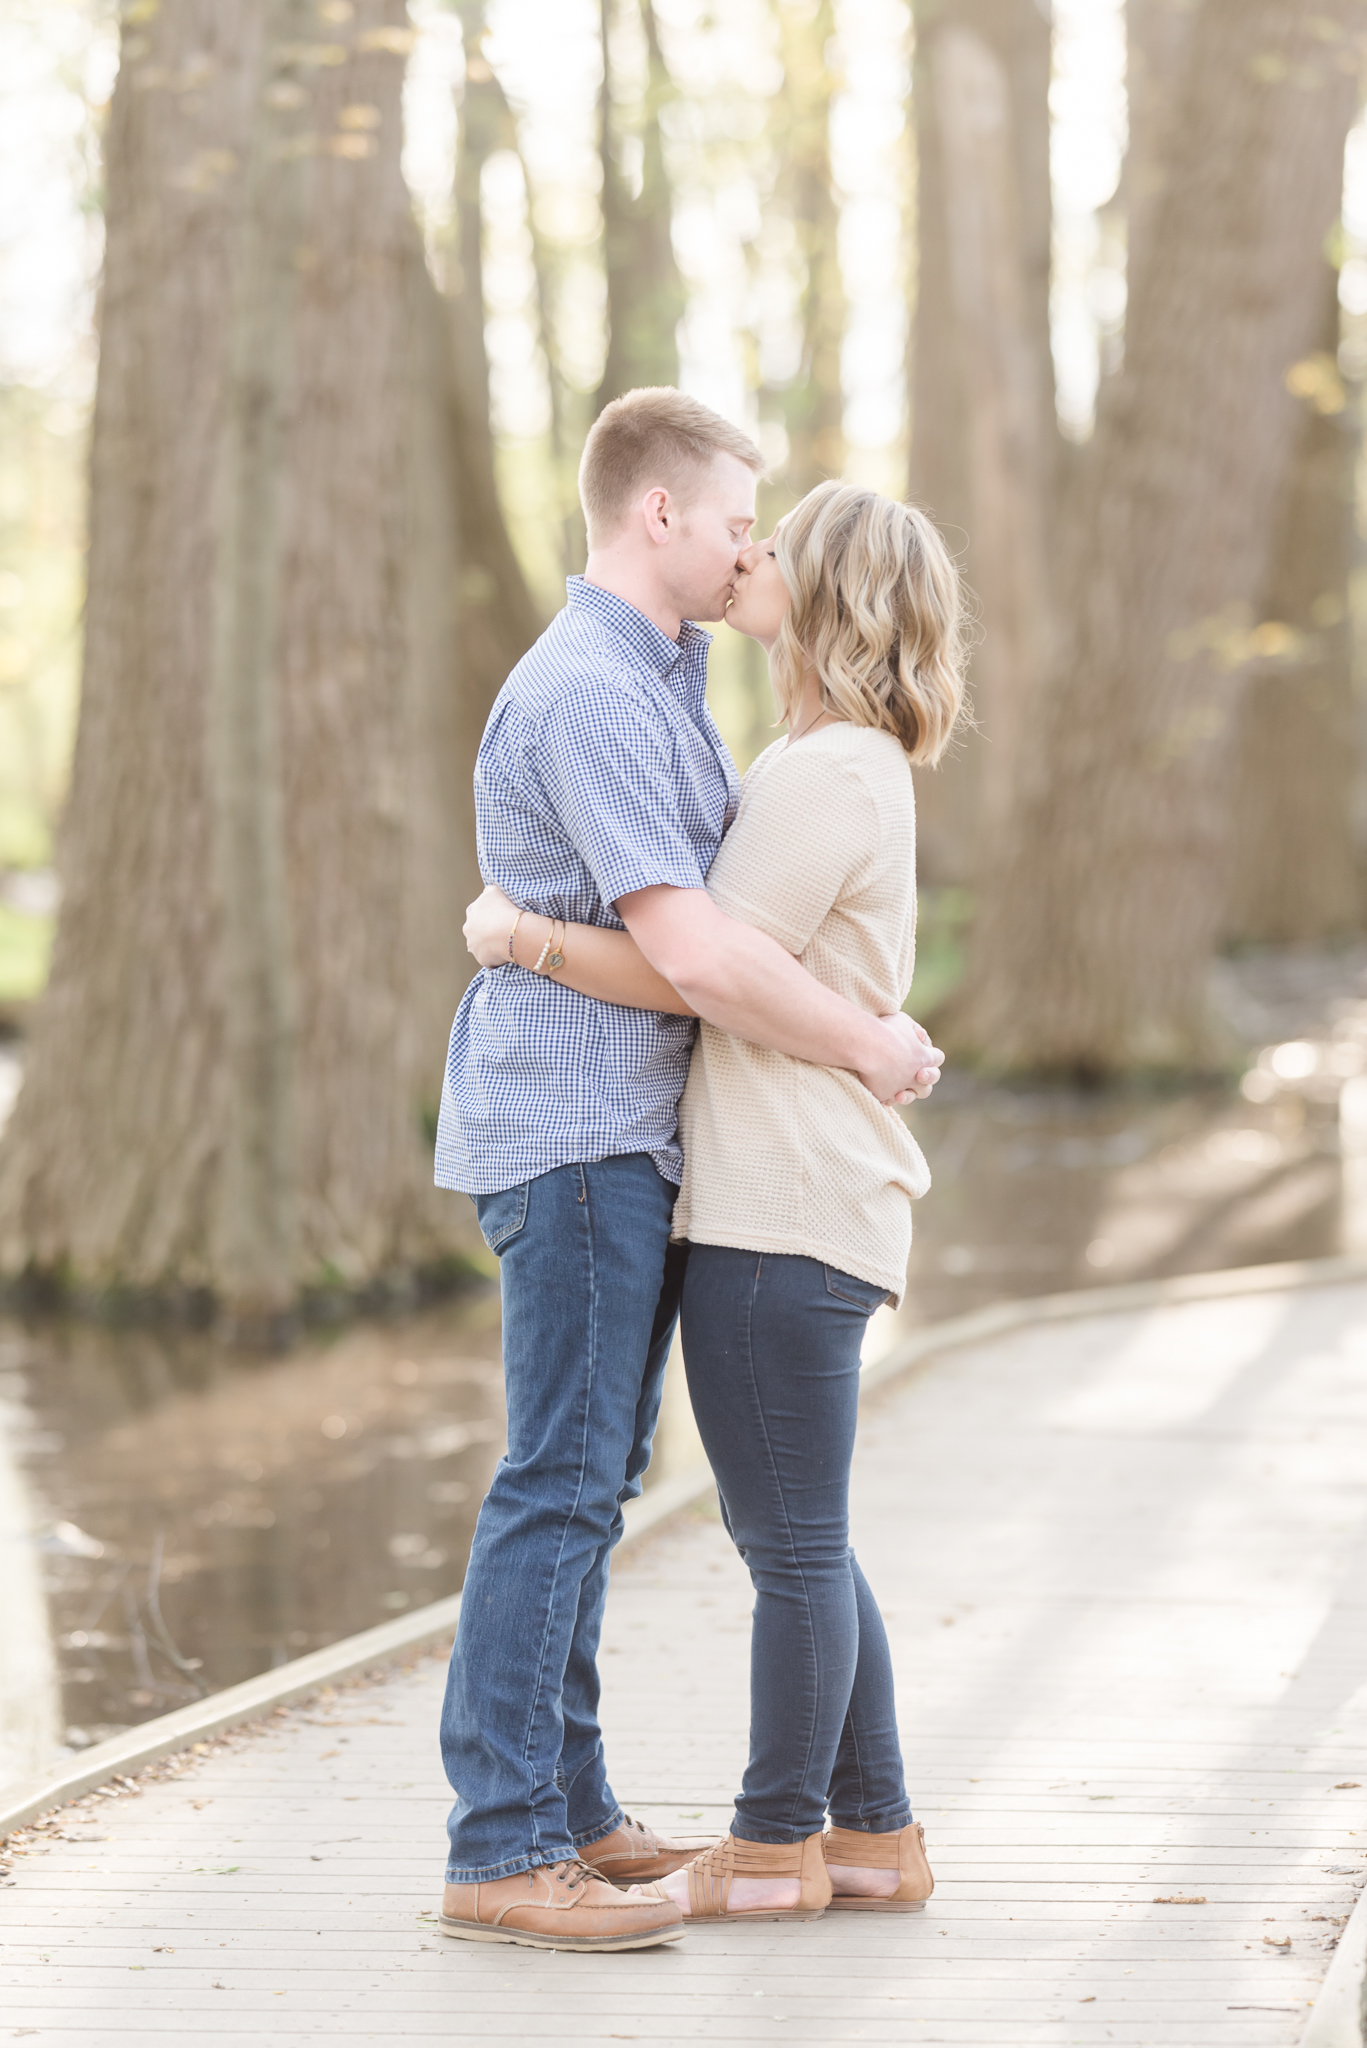 Richie Woods Nature Preserve and Mustard Seed Gardens Engagement Session Wedding Photos-10.jpg